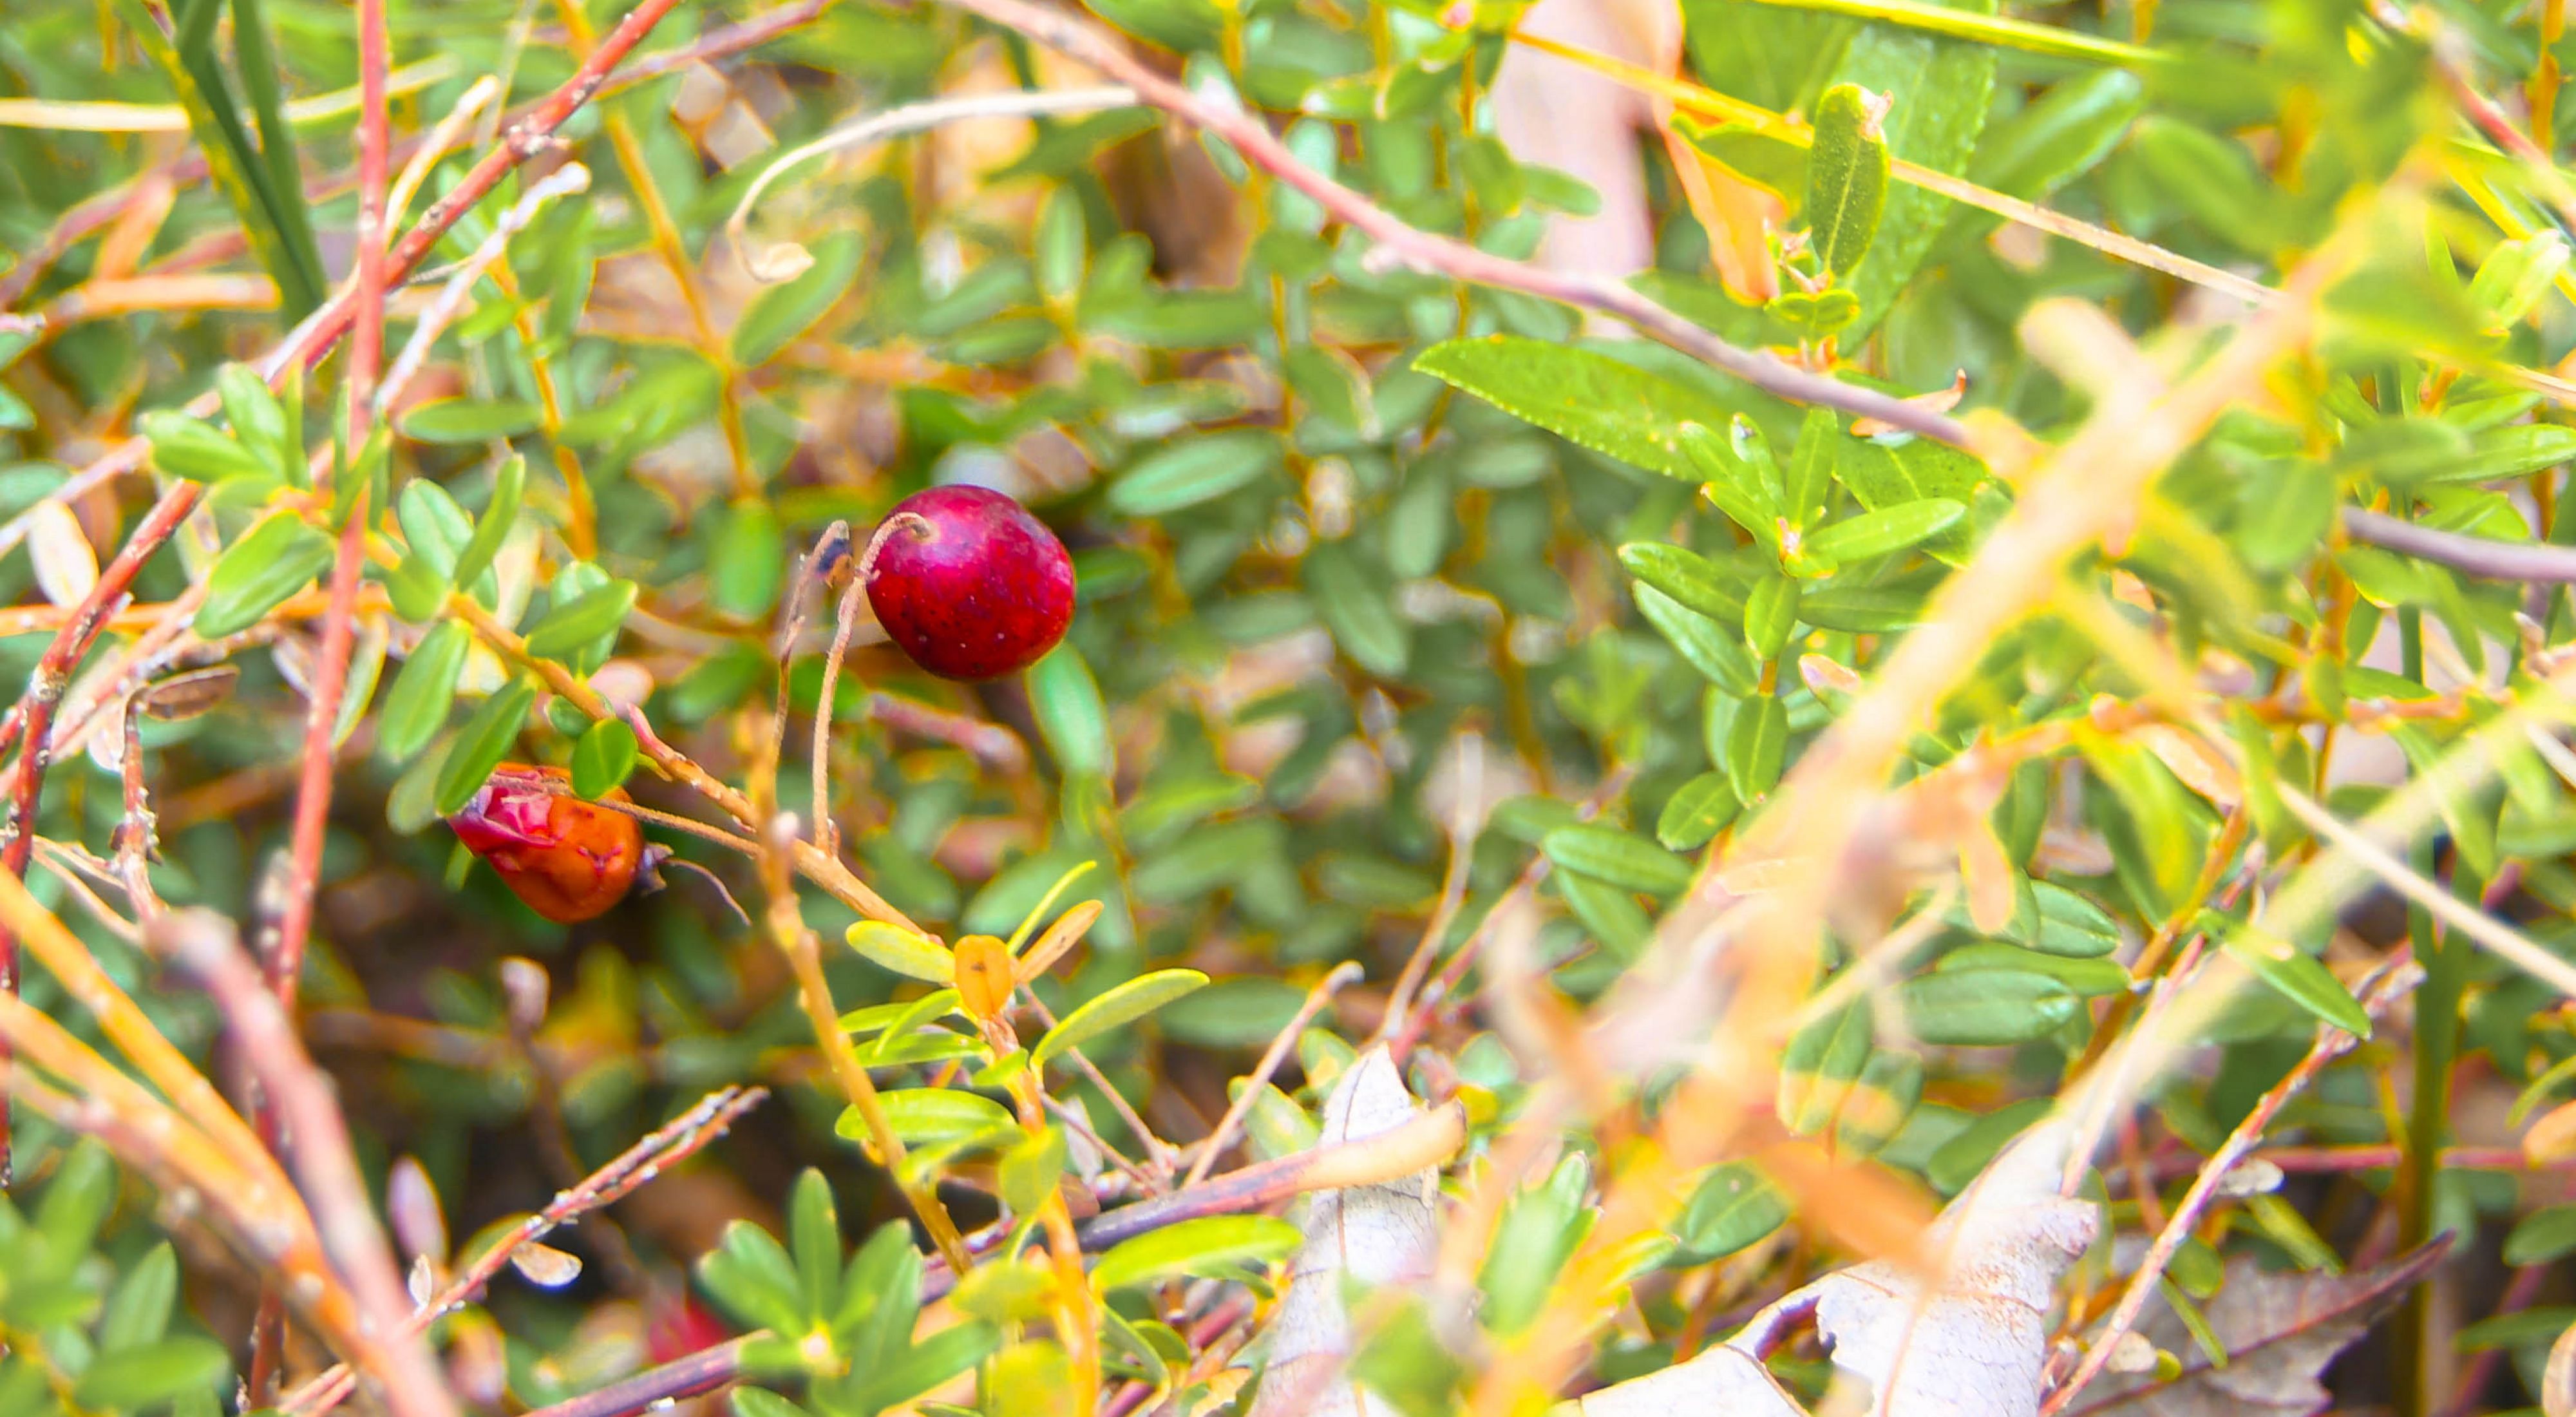 Two red cranberries grow on a green vine surrounded by green and yellow leaves.